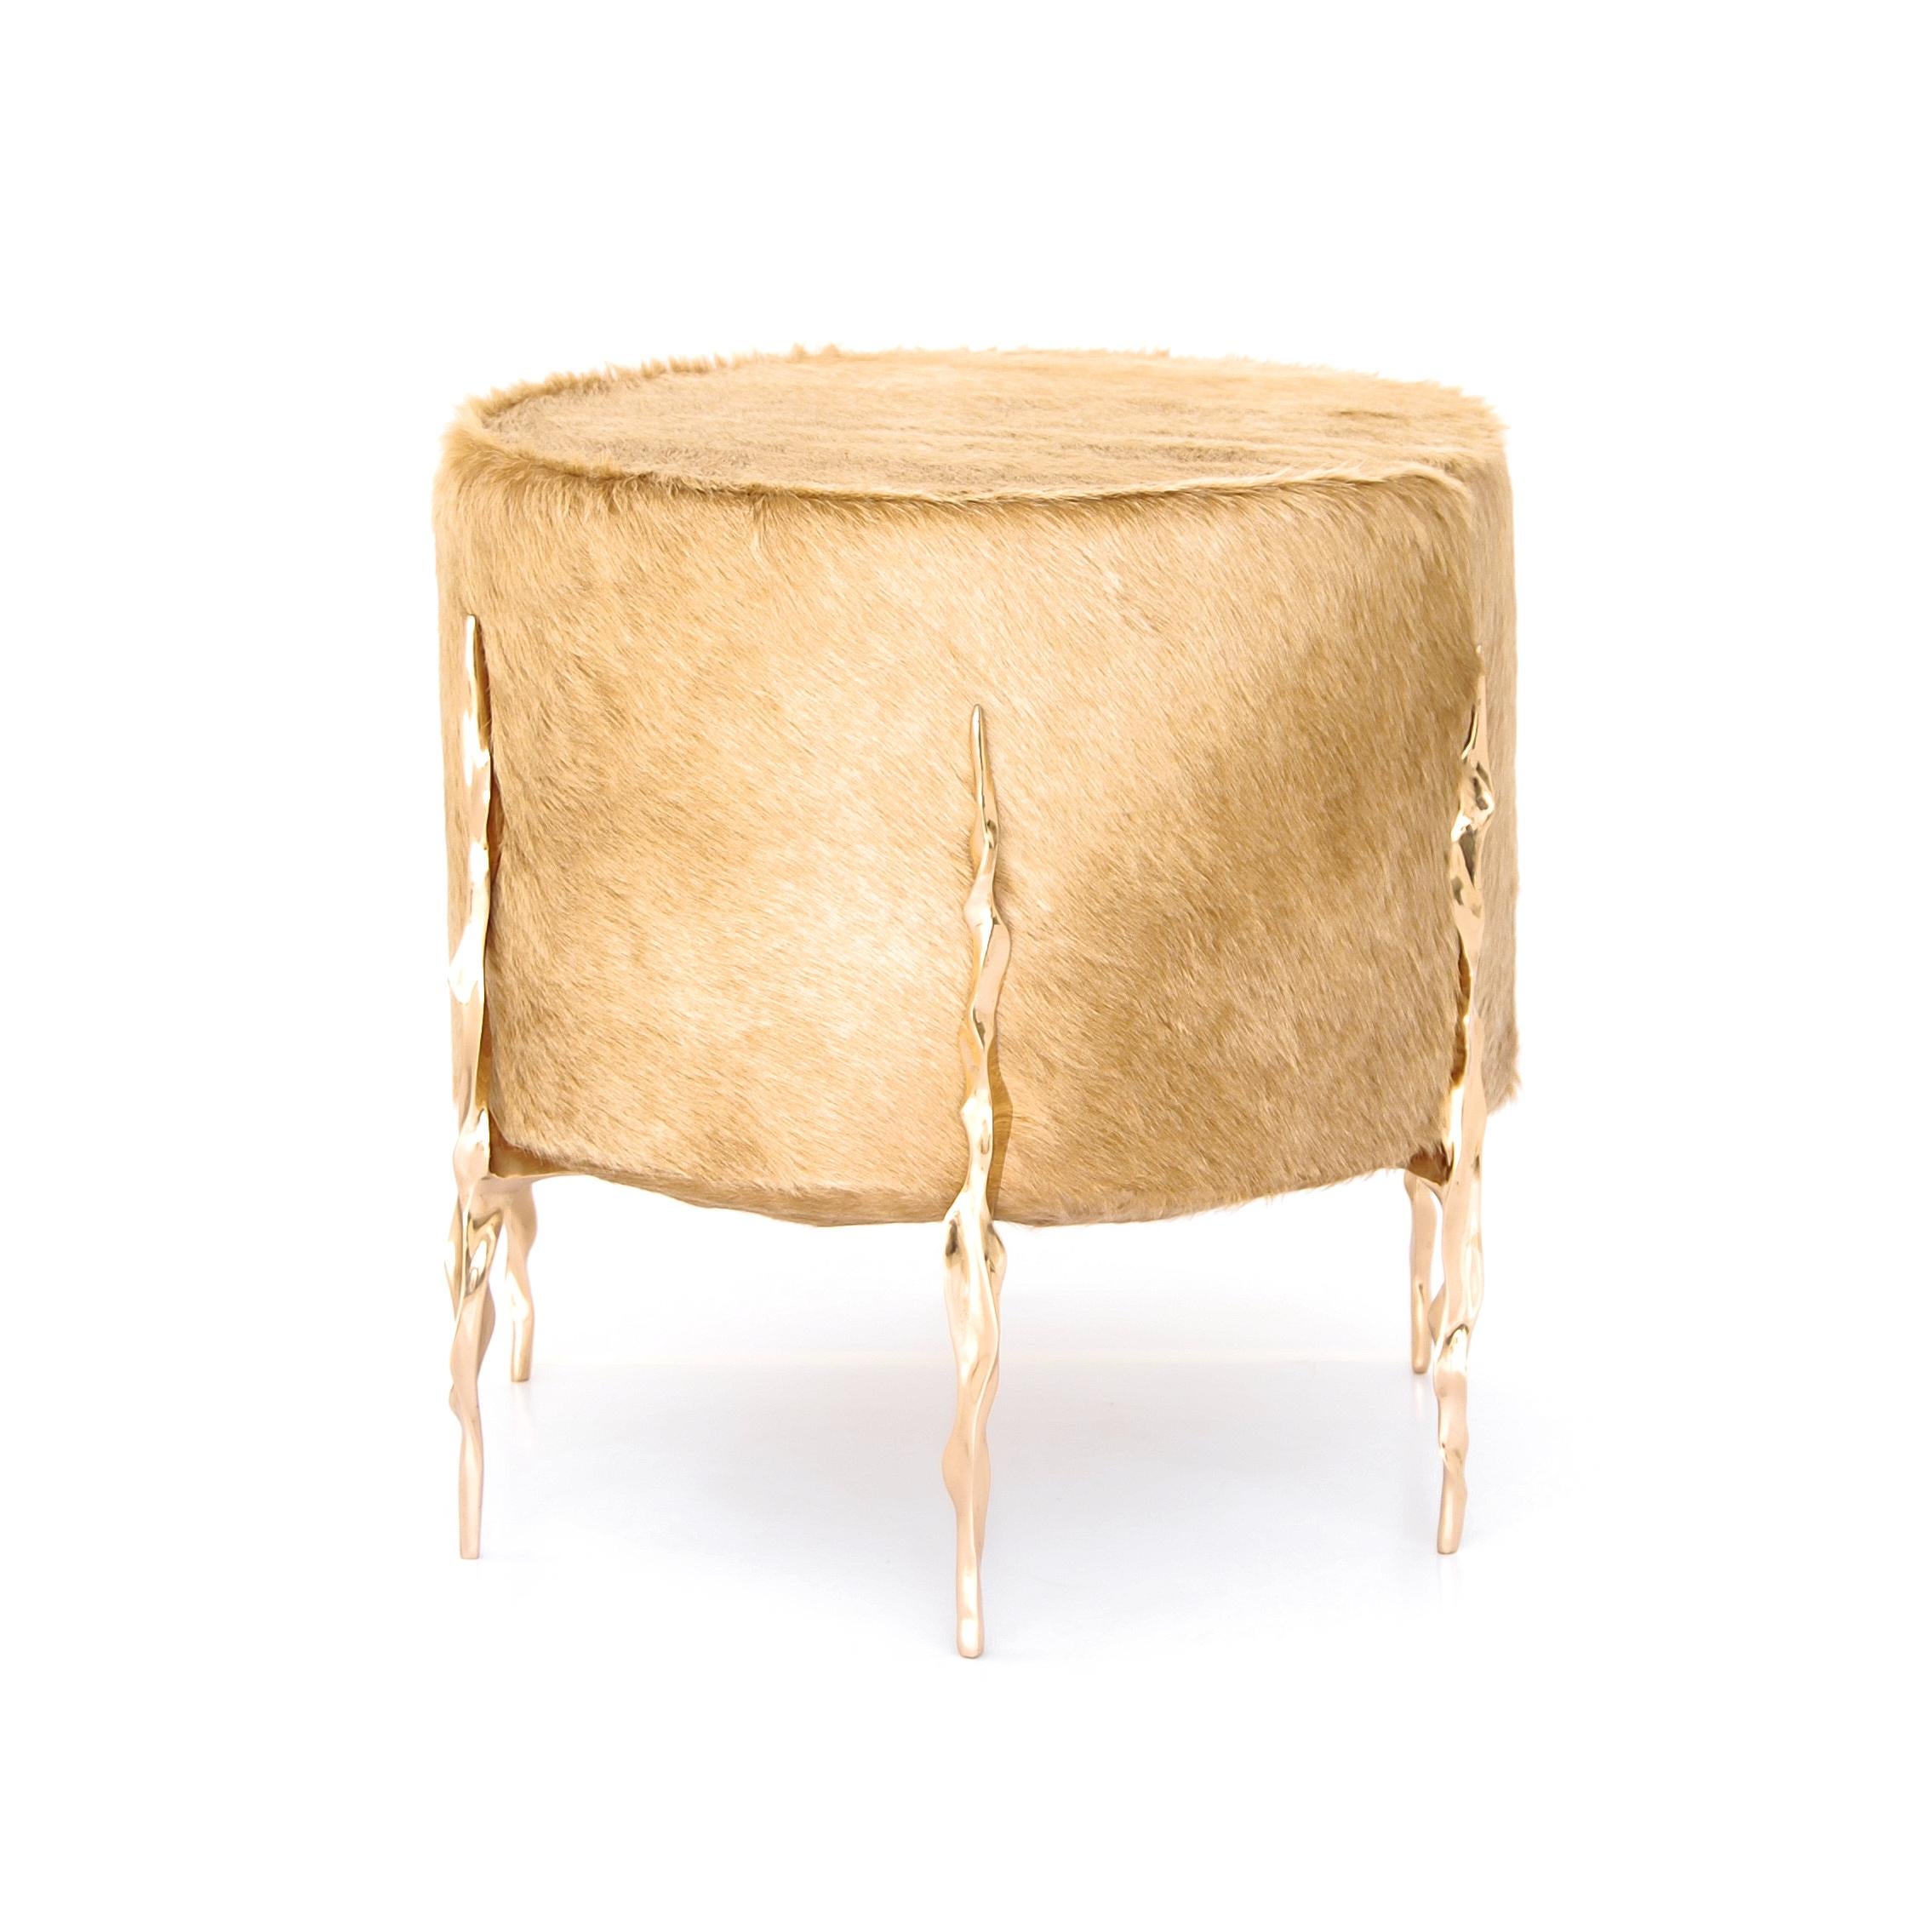 Polished bronze ottoman by Fakasaka Design.
Dimensions: W 45 cm, D 45 cm, H 45 cm.
Materials: polished bronze, leather.

 FAKASAKA is a design company focused on production of high-end furniture, lighting, decorative objects, jewels, and